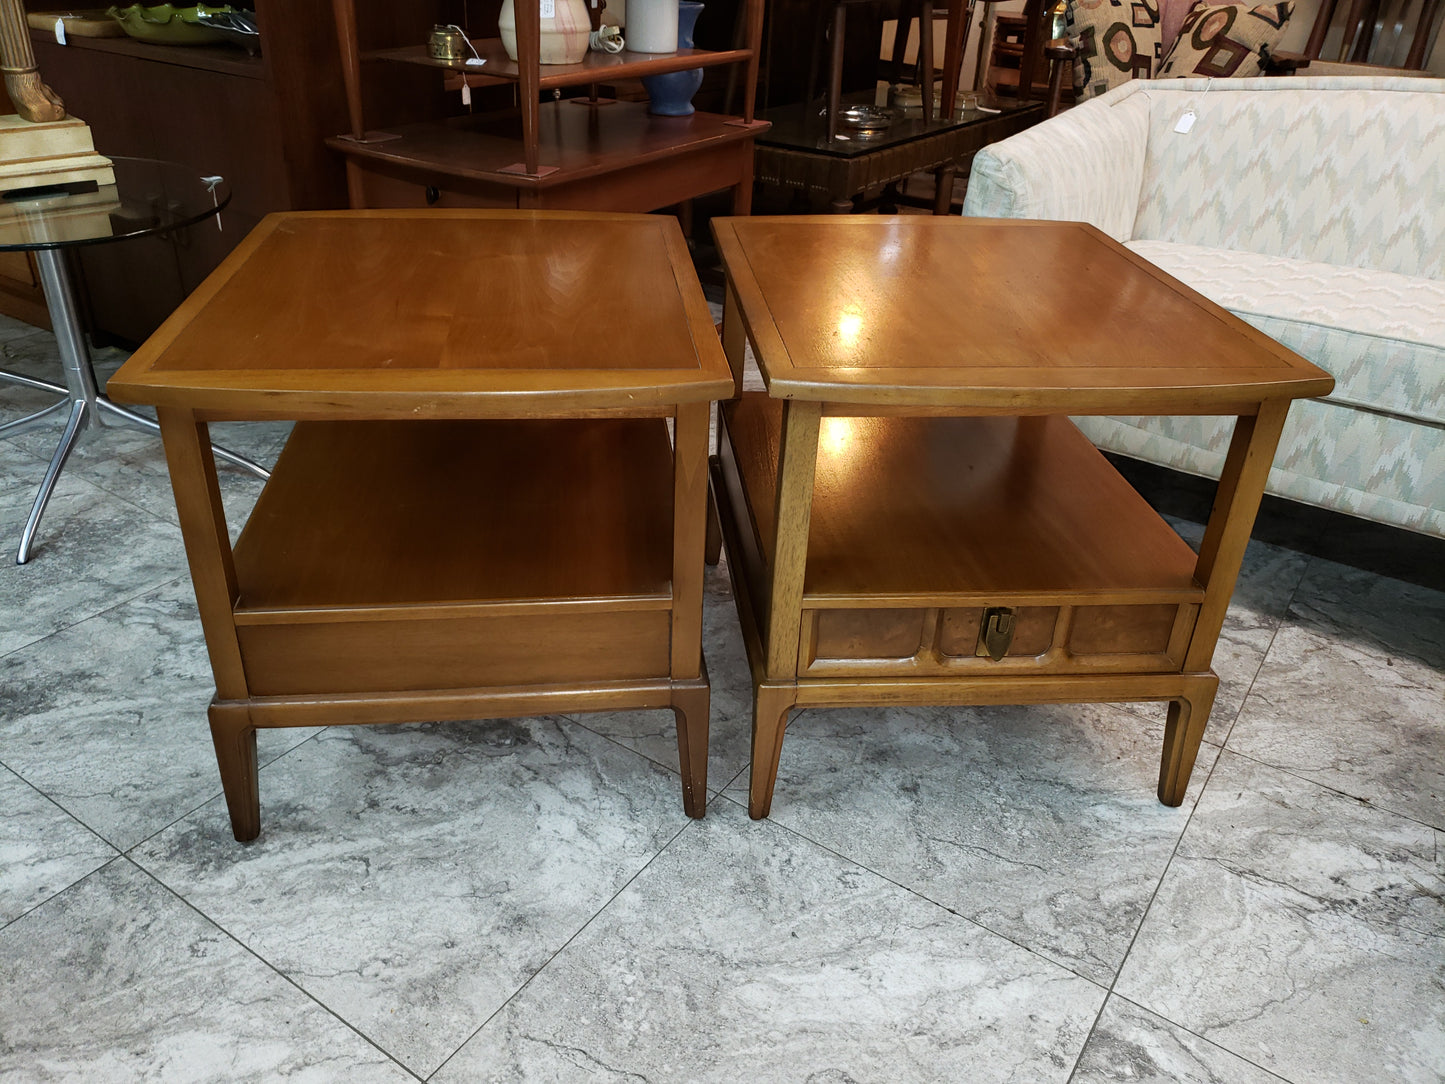 Vintage Coffee Table and 2 Matching End Tables 1960s MCM Mid Century Modern 3pc